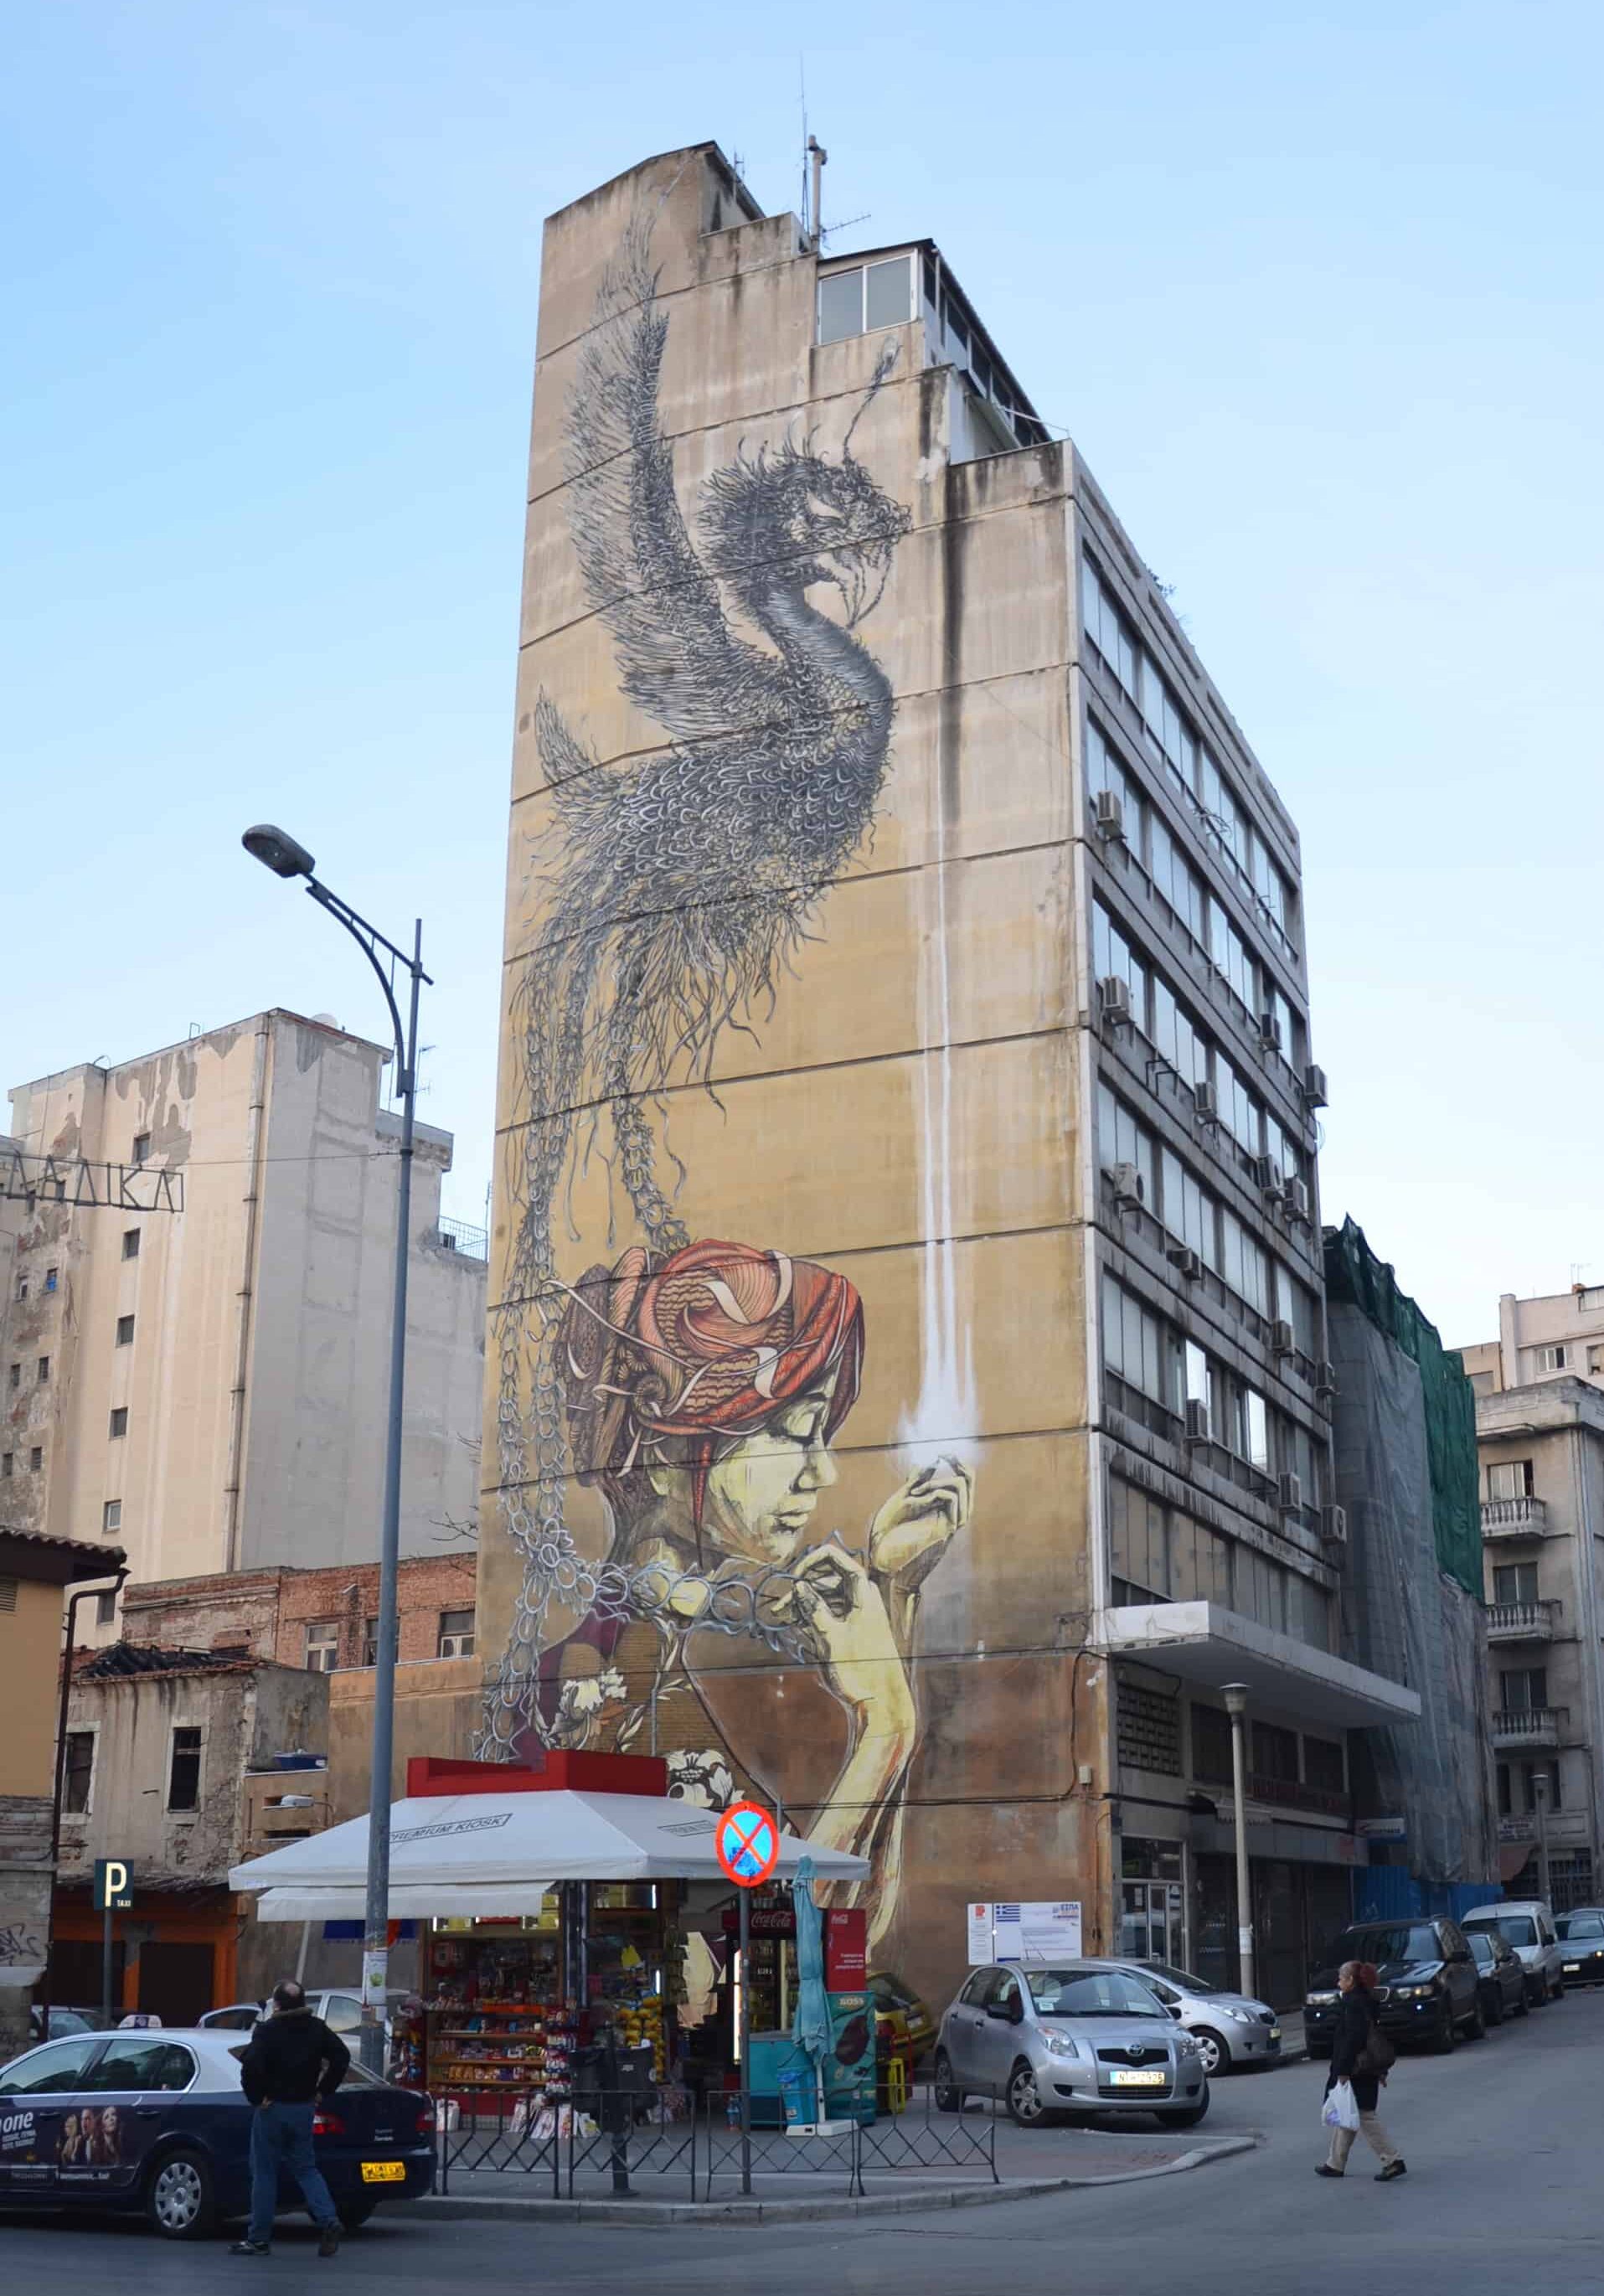 Mural on the side of a building in Thessaloniki, Greece